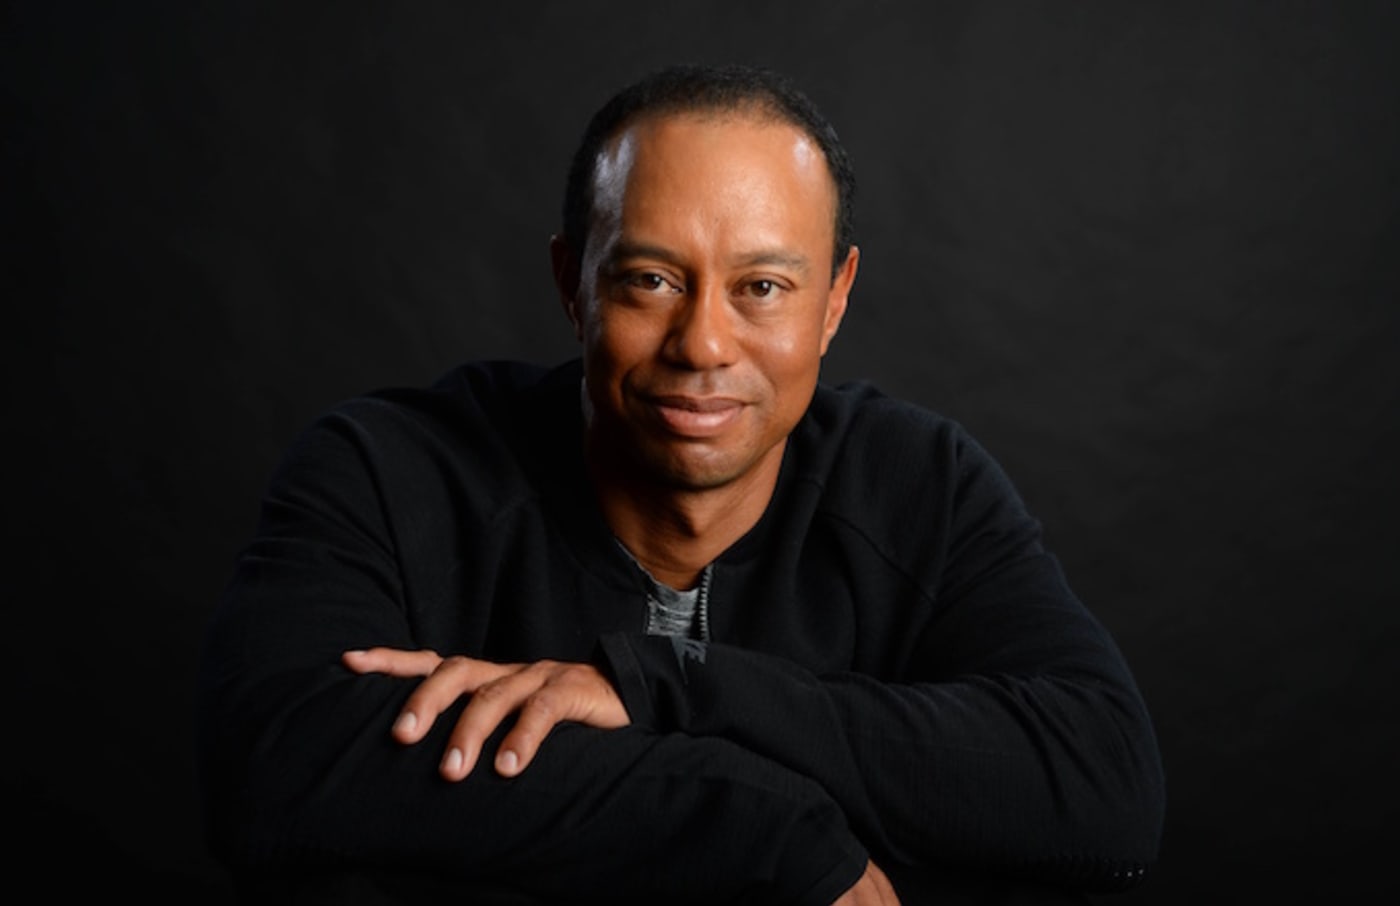 Tiger Woods poses for portrait.